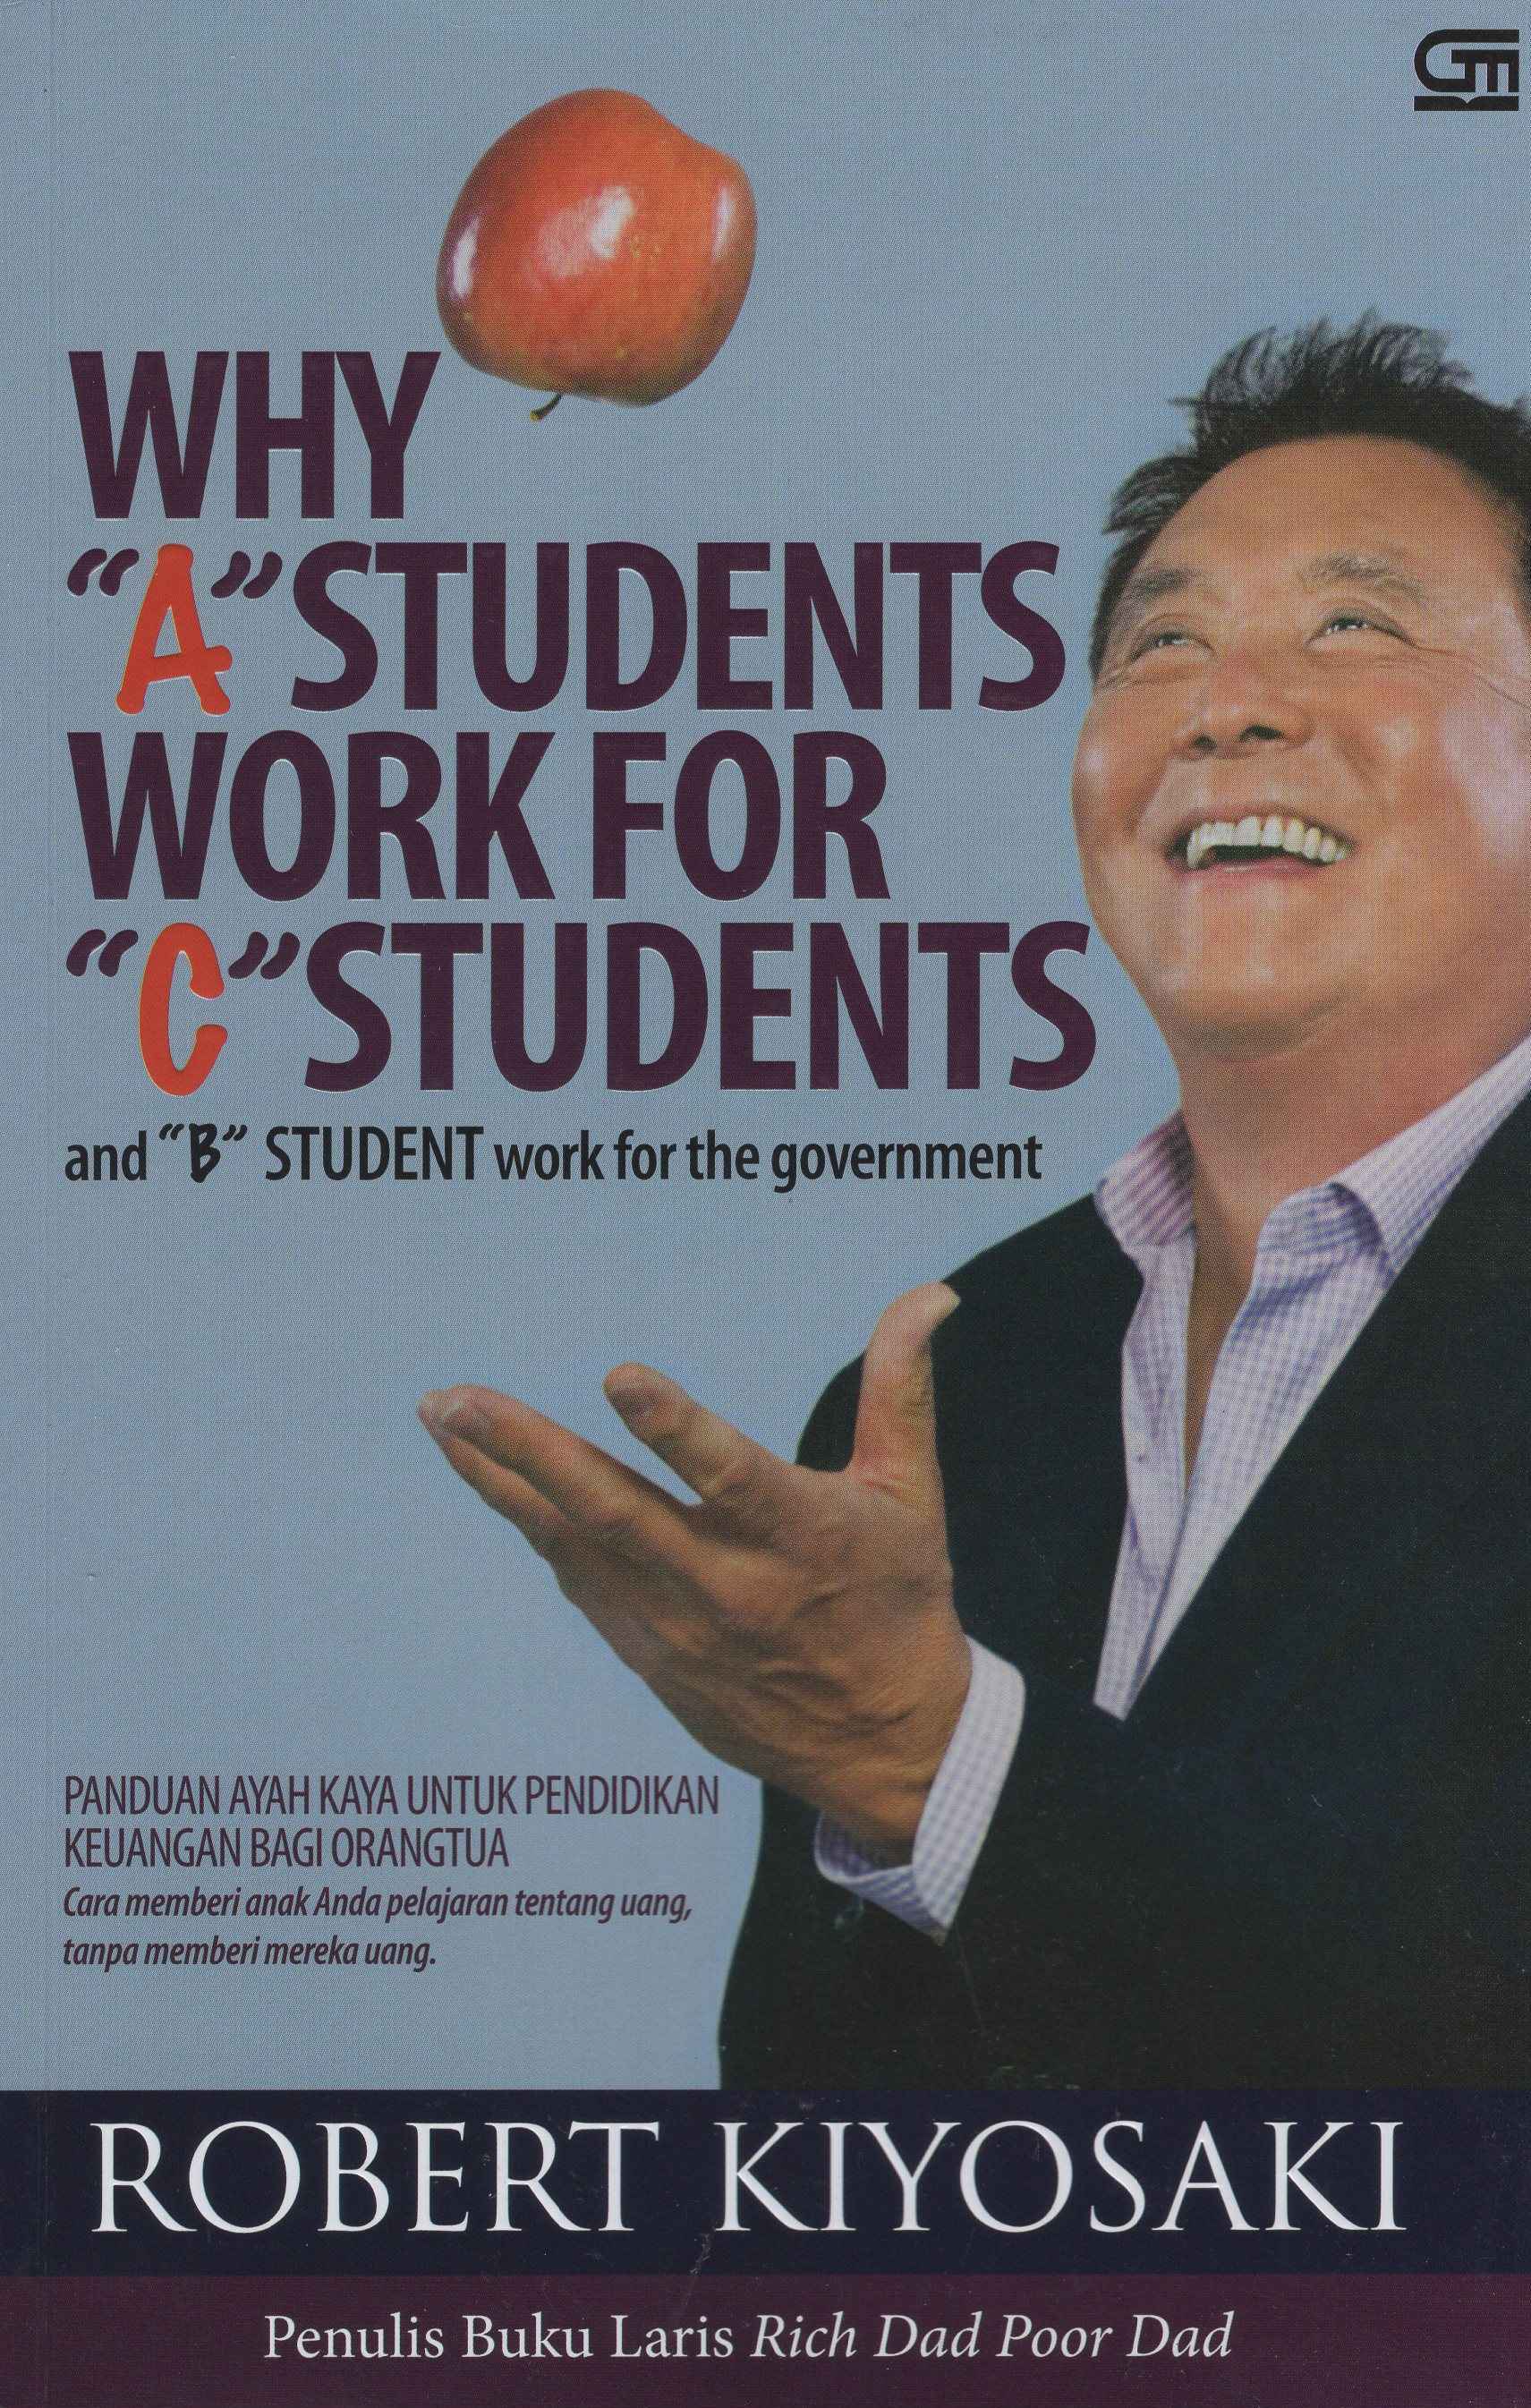 Why A Students Work For C students And B  Students Work For The Government